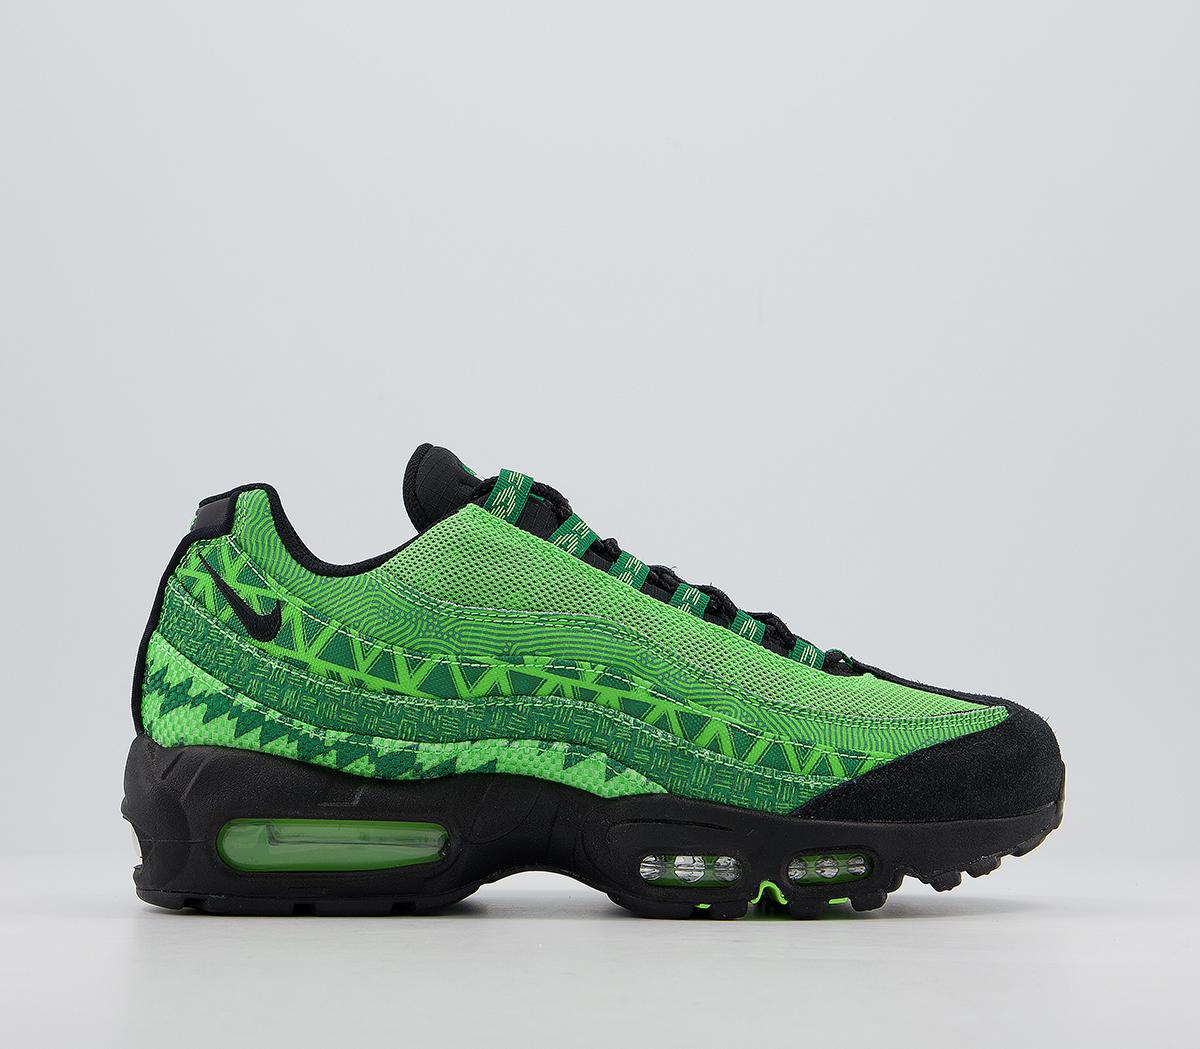 NikeAir Max 95 TrainersPine Green Black Sub Lime White Ctry